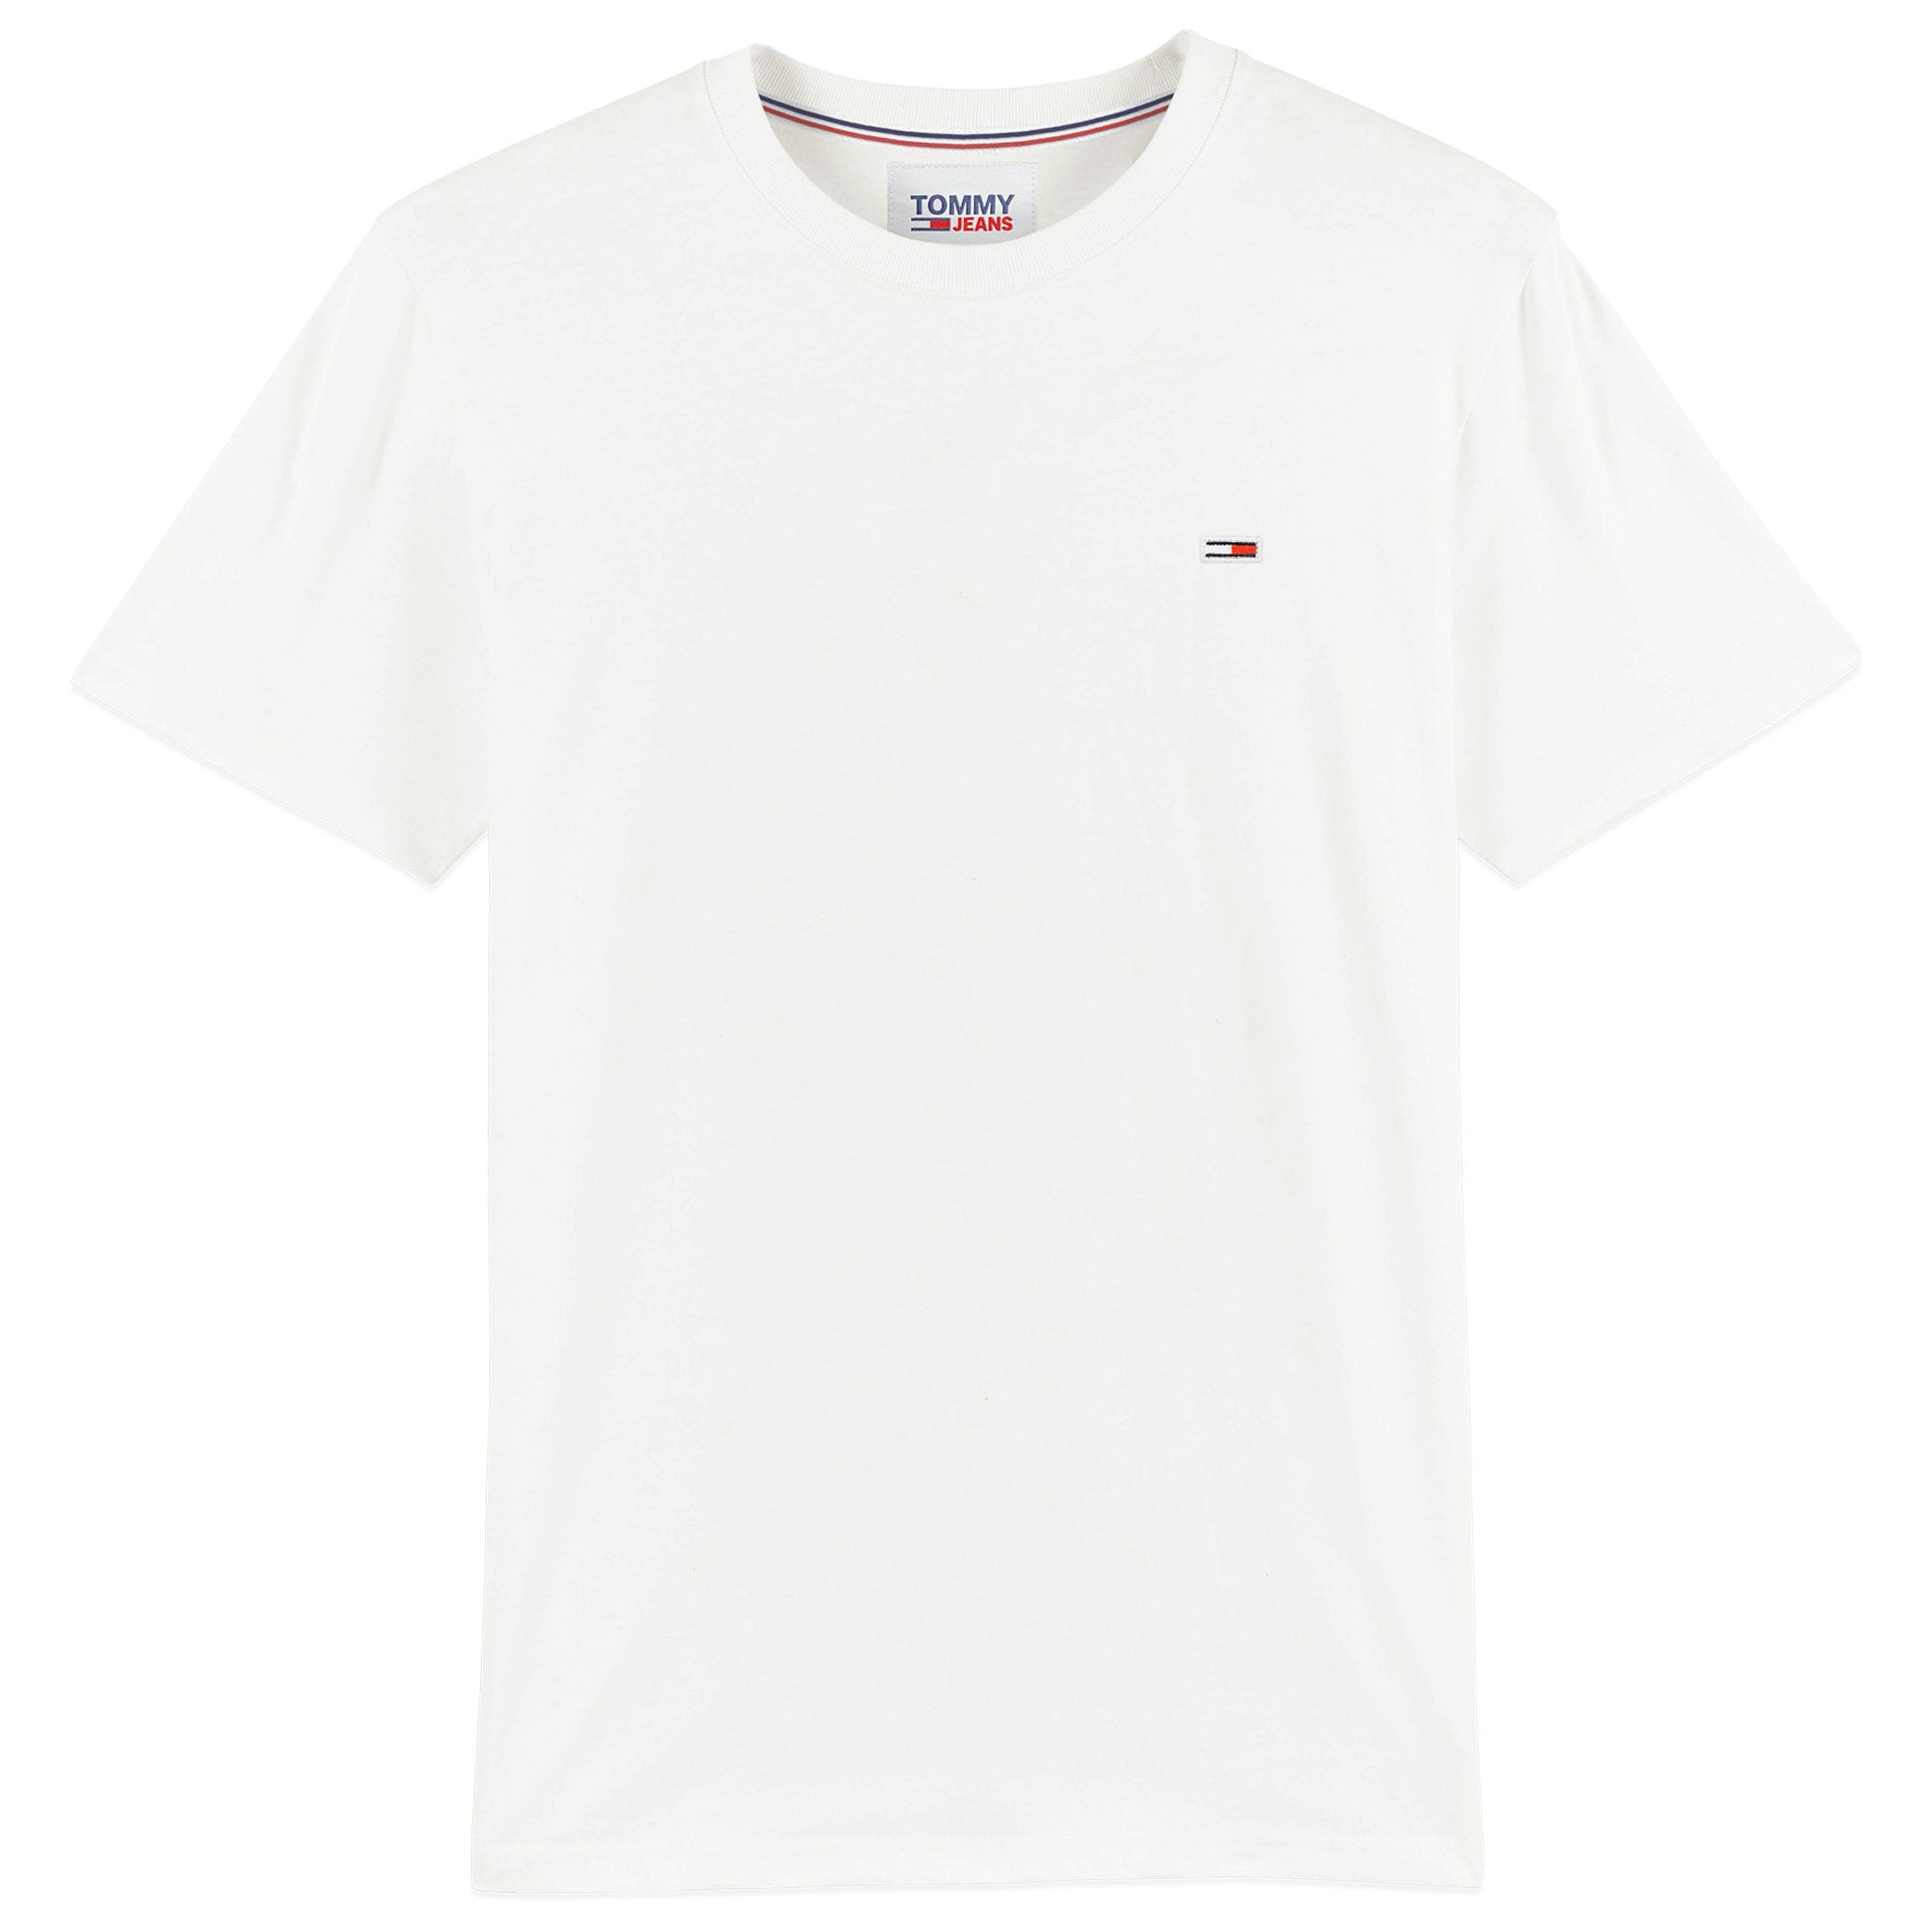 Tommy Jeans New Flag T-Shirt - White